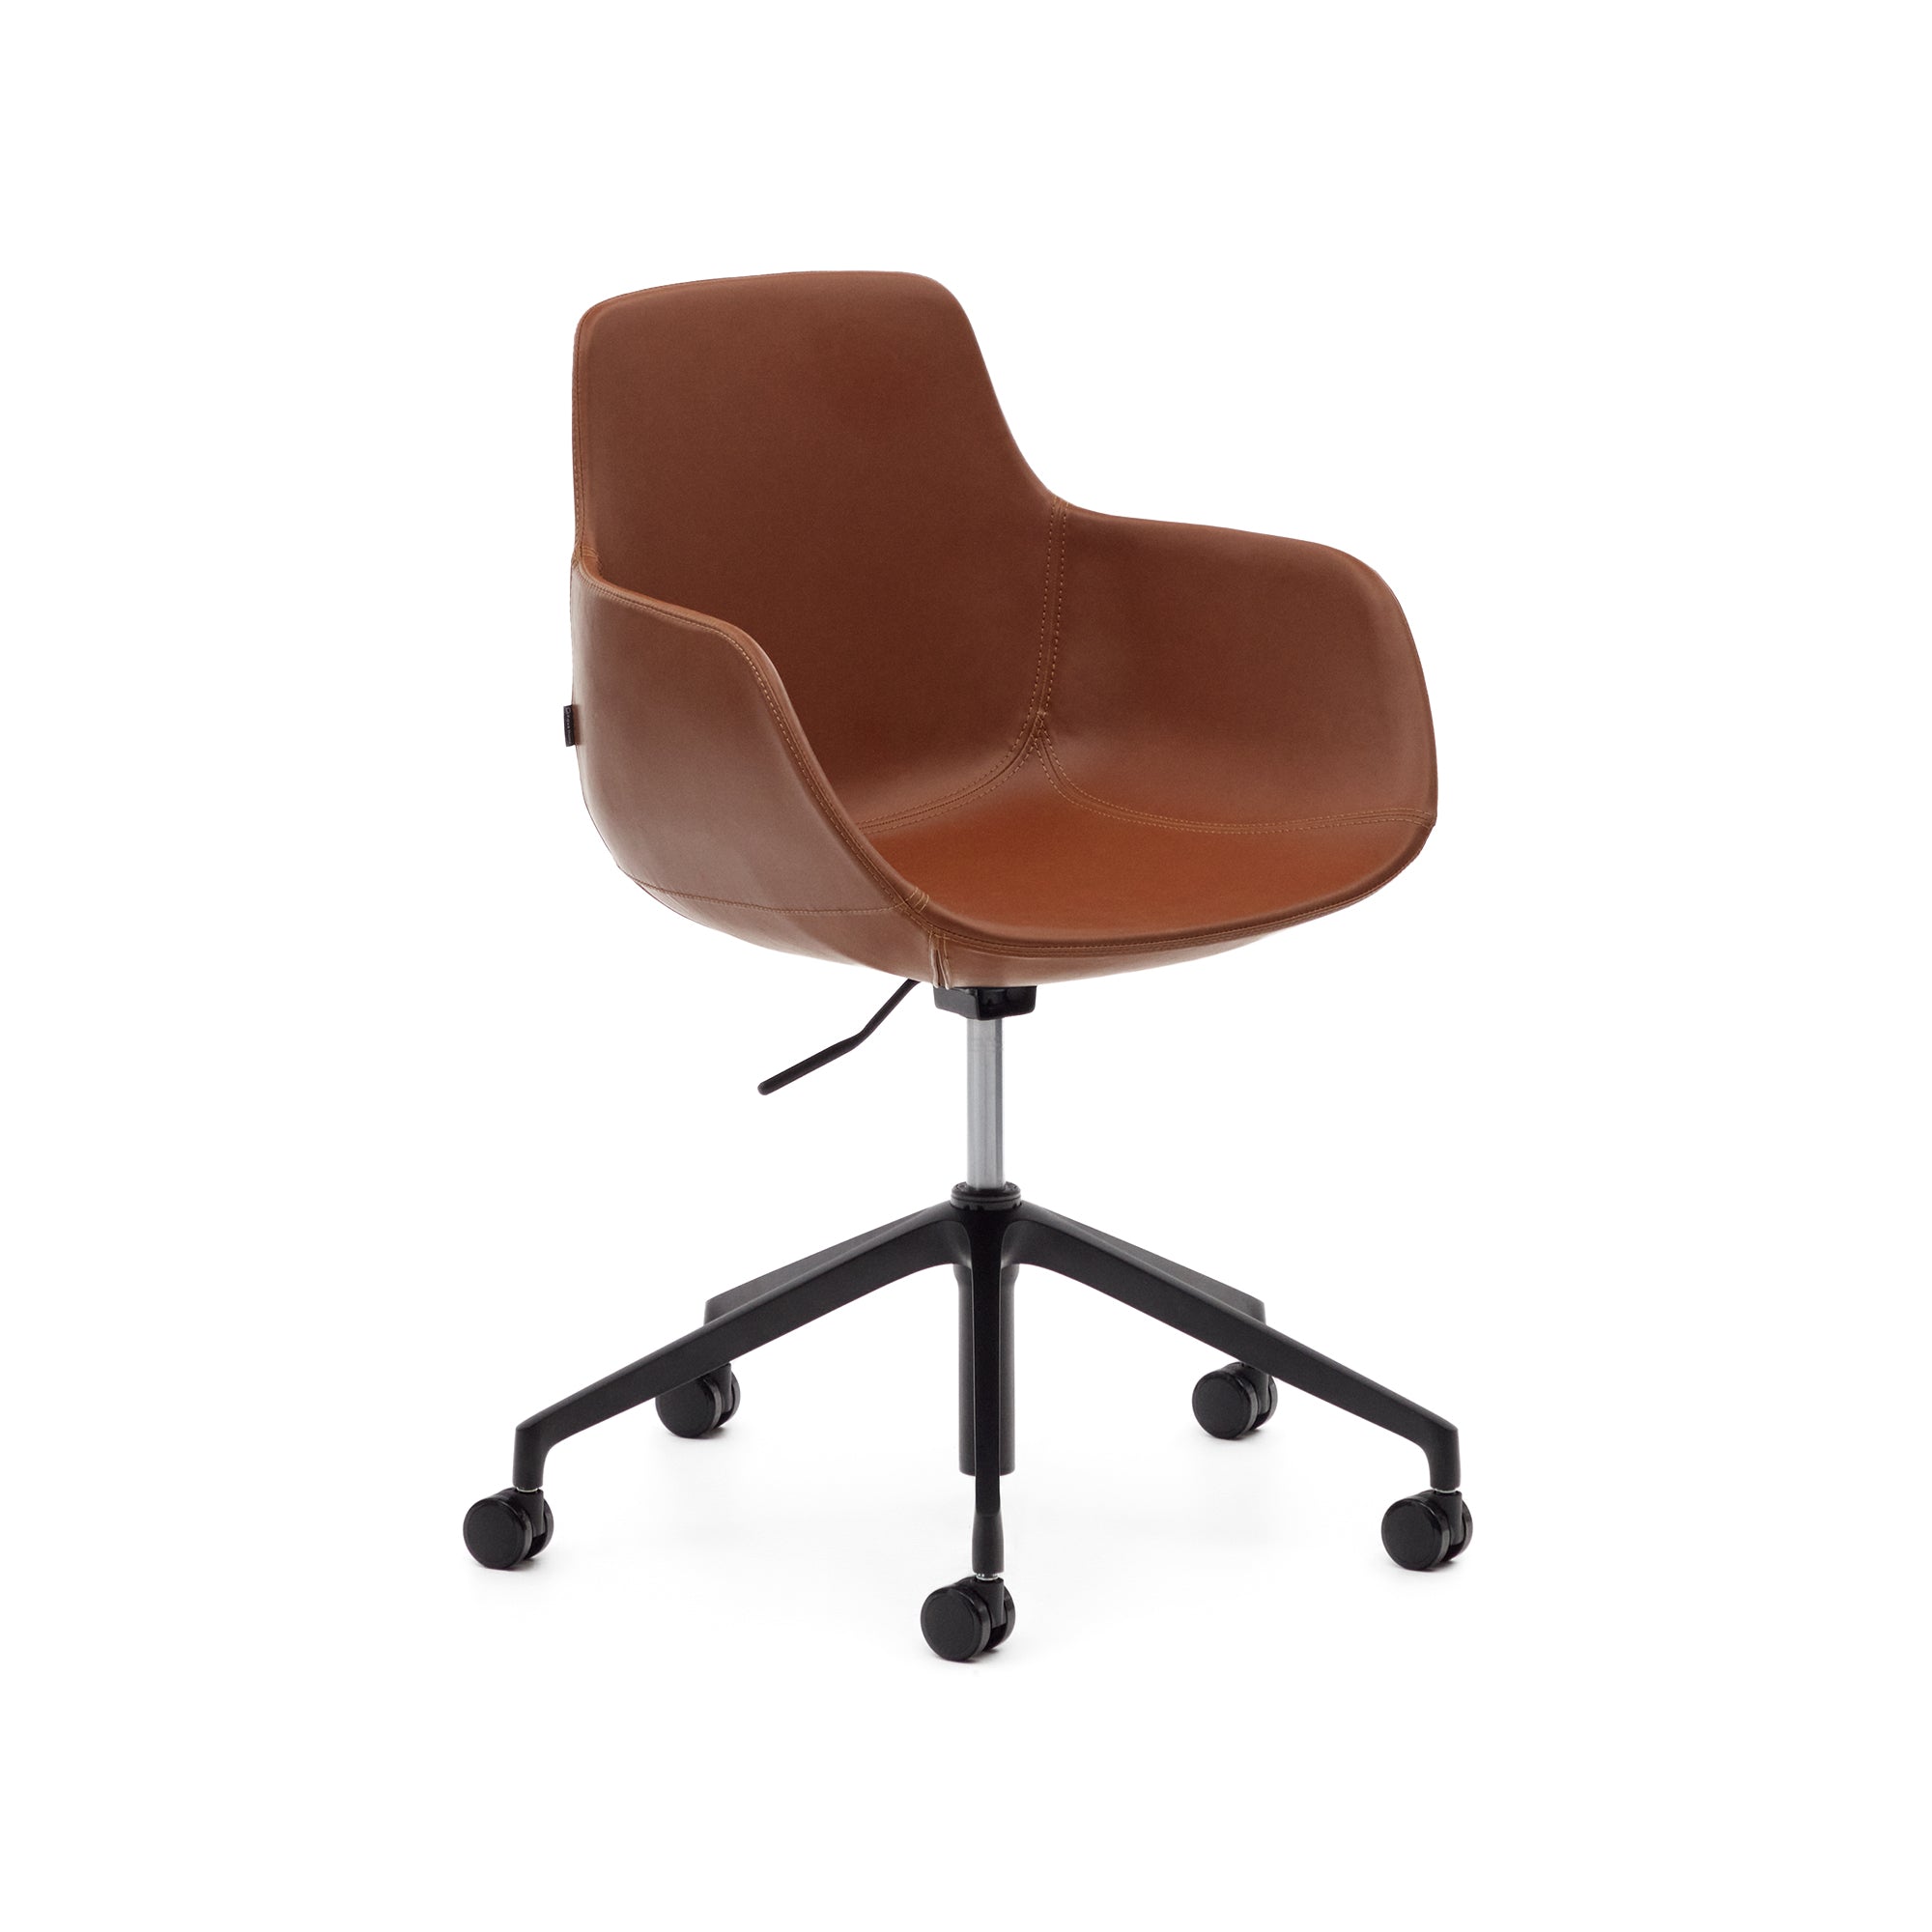 Tissiana desk chair in brown faux leather and aluminium with matte black finish